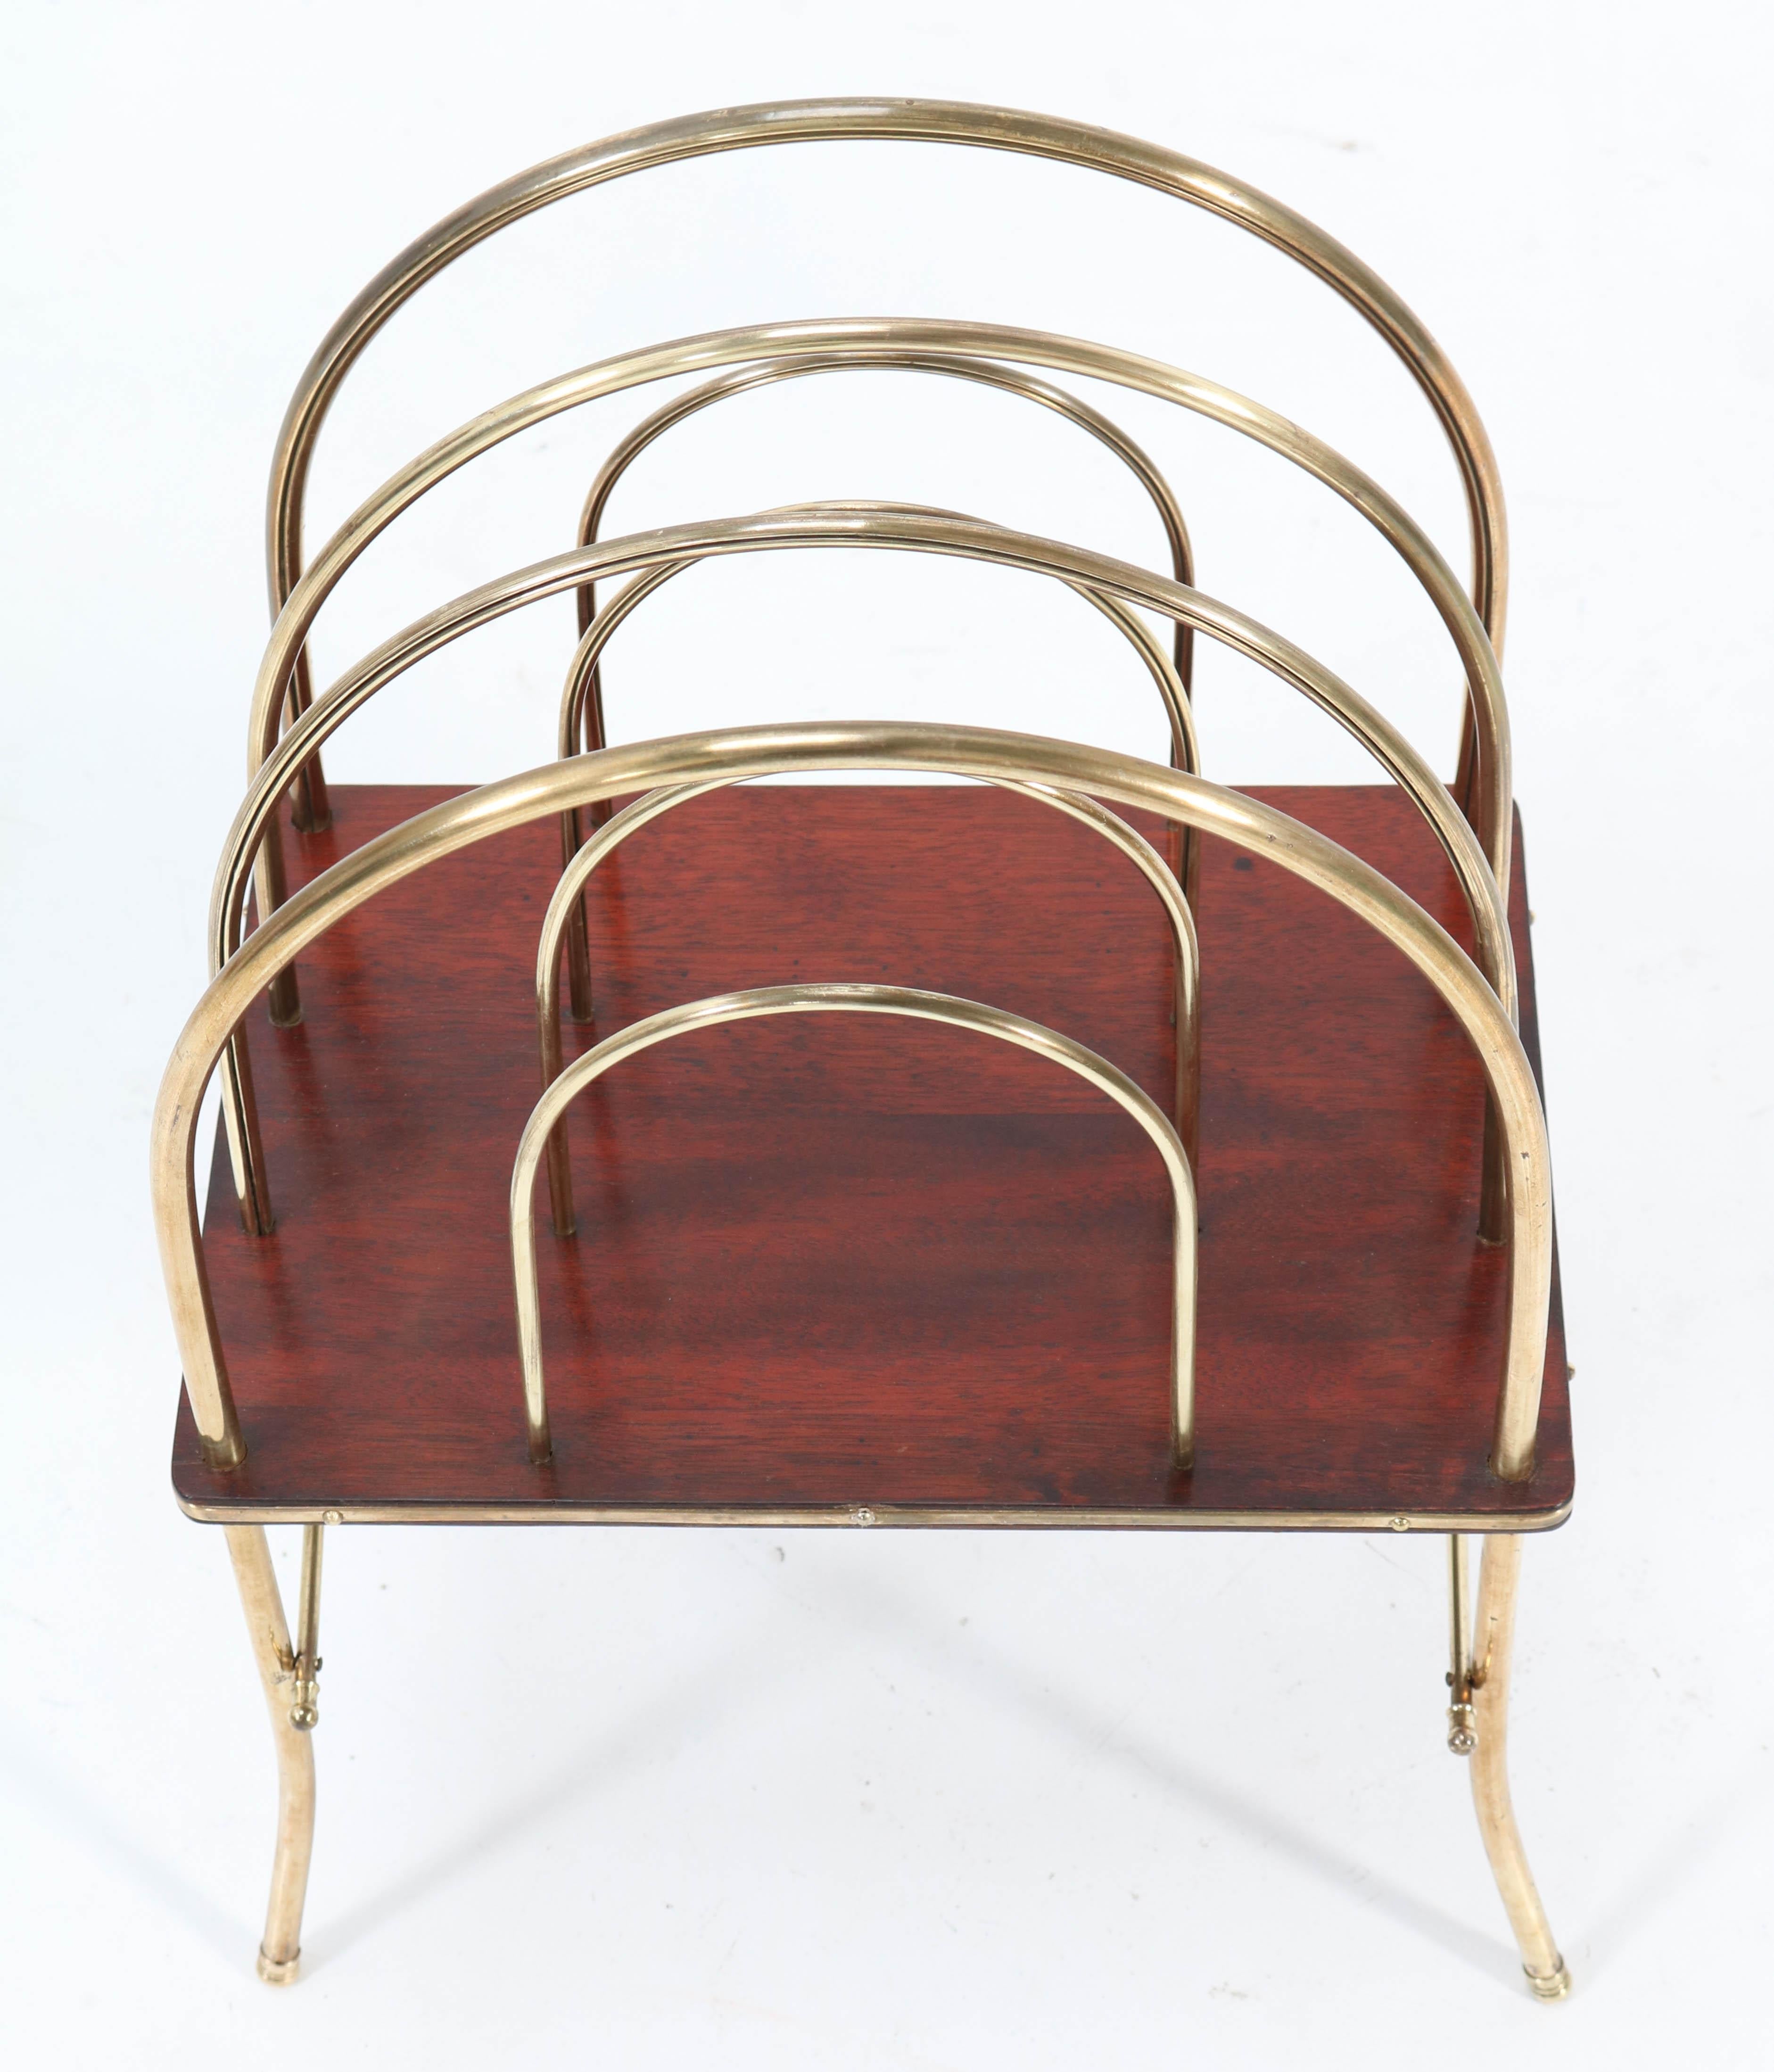 French Brass and Mahogany Art Nouveau Magazine Rack, 1900s For Sale 6